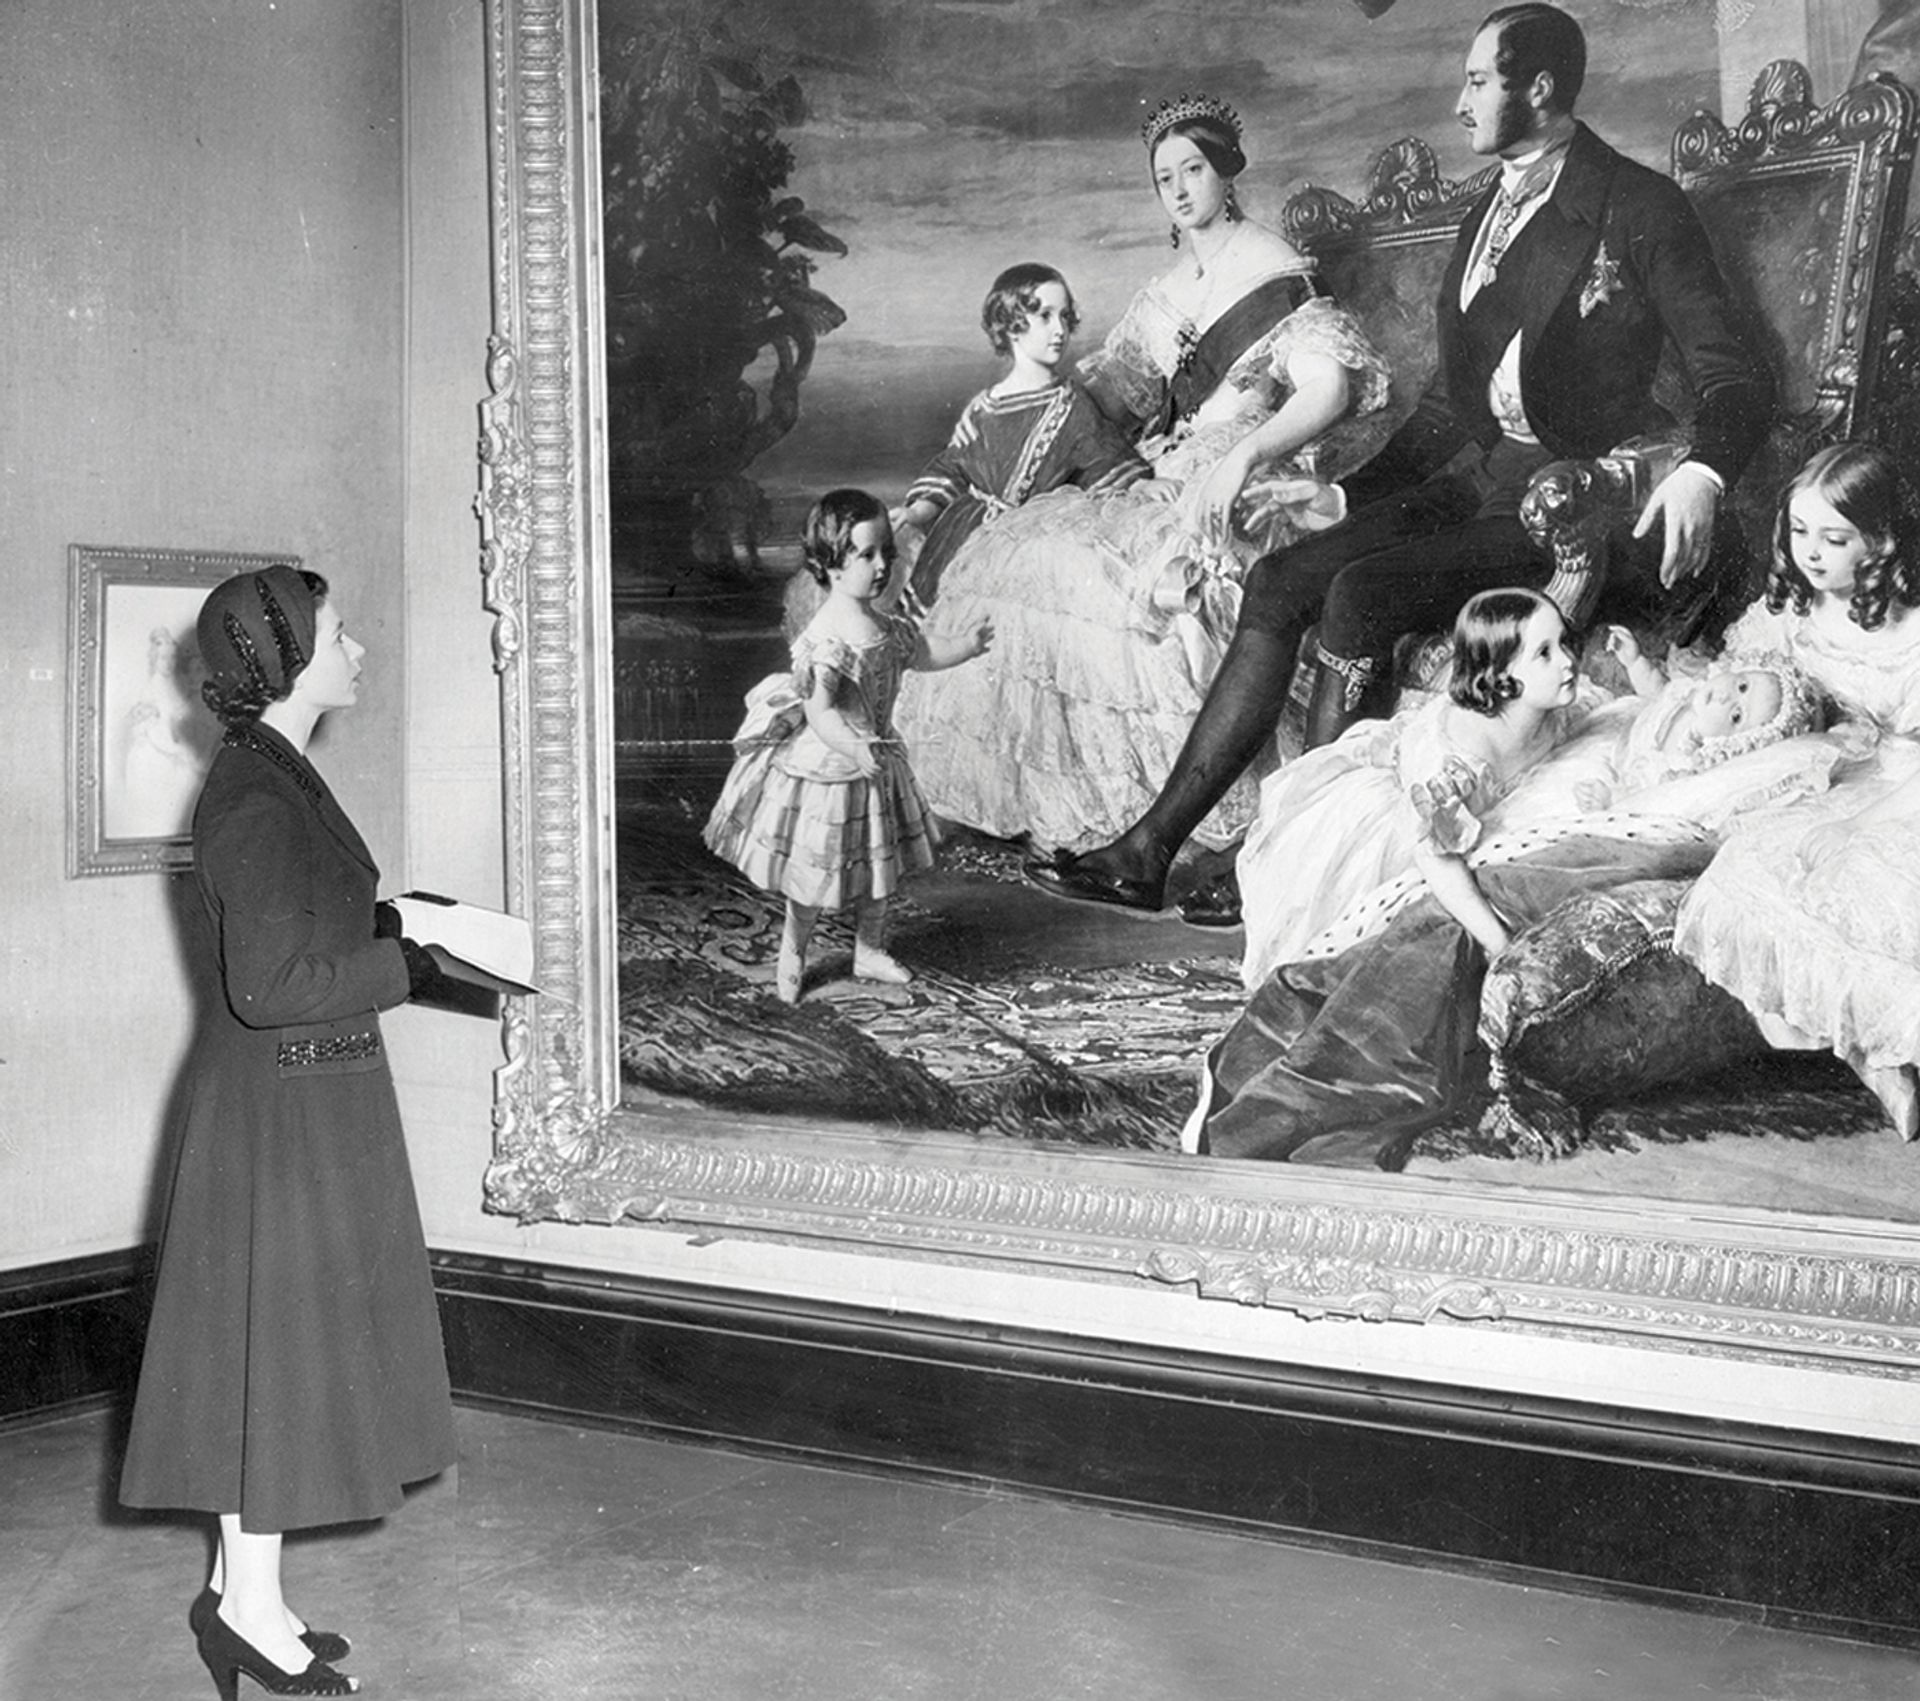 The Queen standing before Royal Family, by Franz Winterhalter, on loan to the Royal Academy's Kings and Queens AD653-1953 exhibition at Burlington House, London, 1953. Keystone/Getty Images